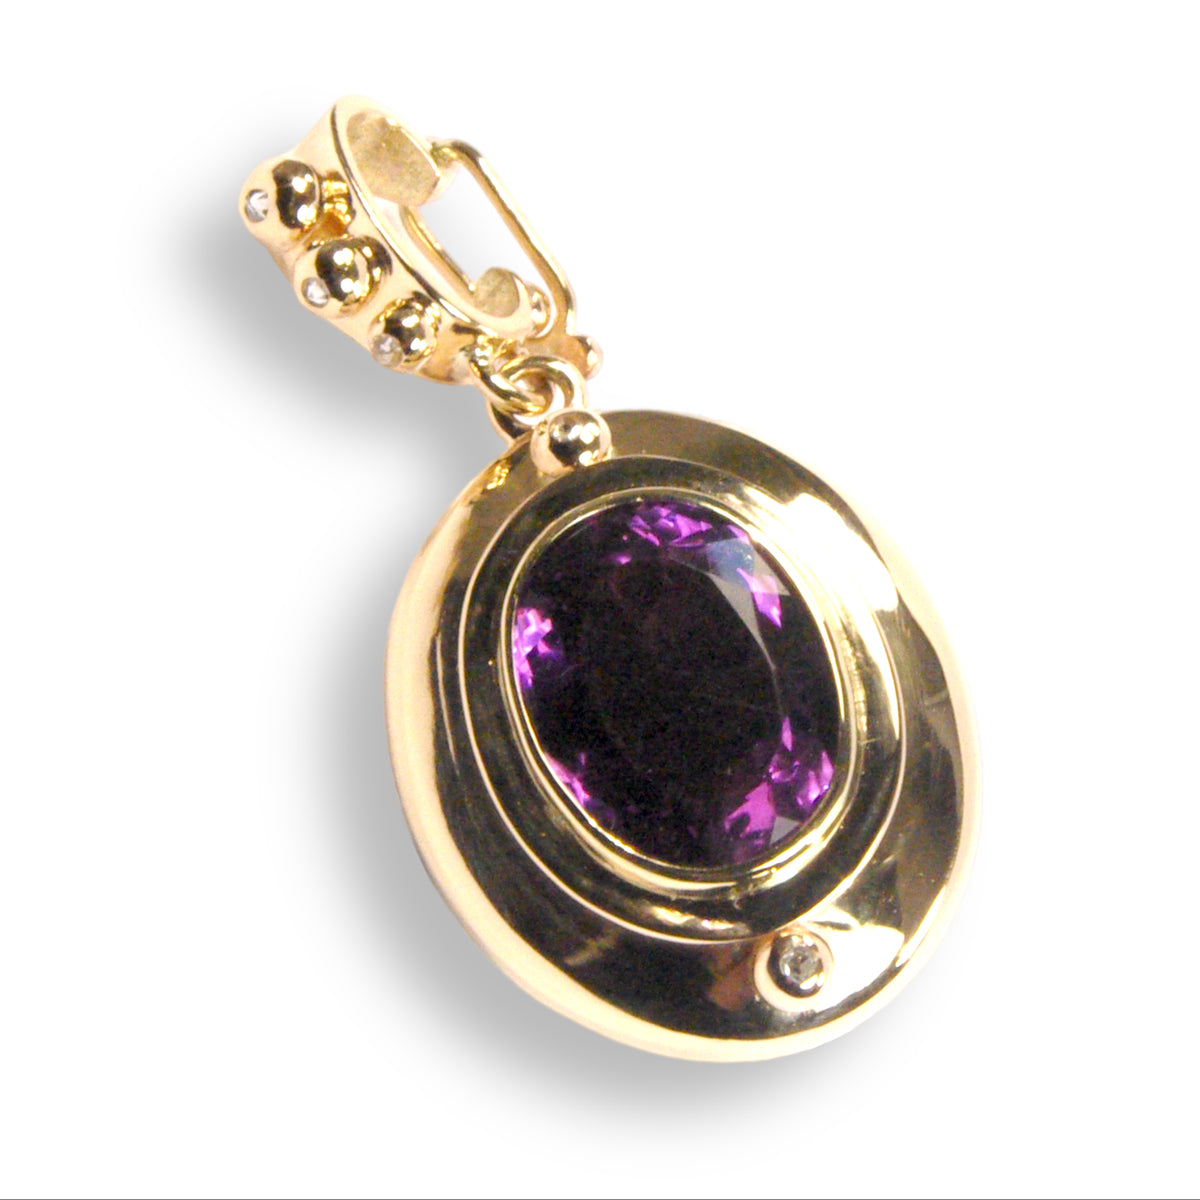 Elsie&#39;s Custom Bespoke Oval Clip-On Pendant For Pearls  | In Remodelled 9ct Gold | Set With Her Own Amethysts